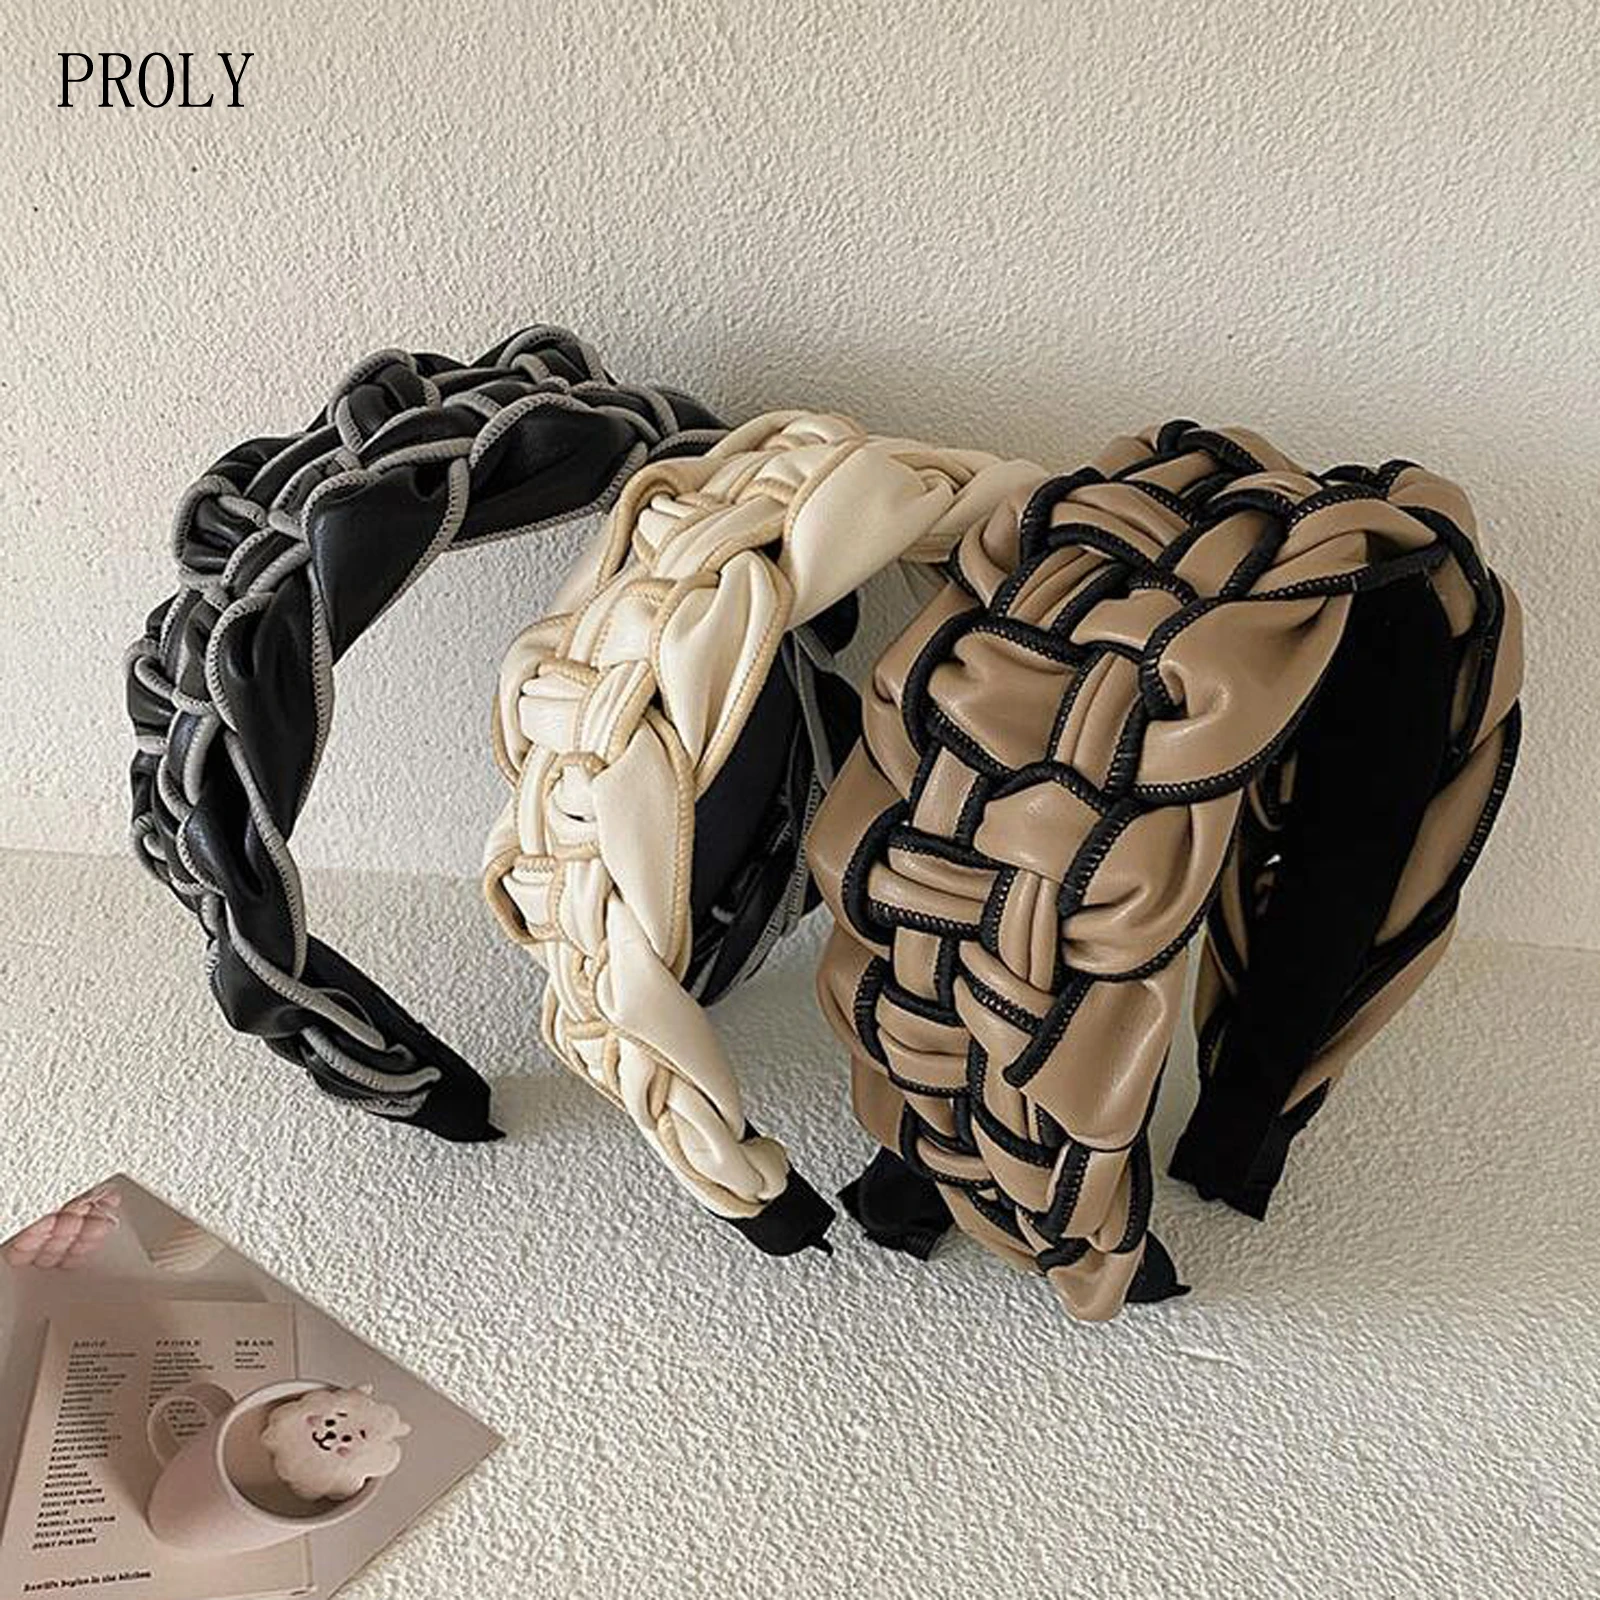 PROLY New Fashion Over Size Wide Side Hairband Handmade Braided Headband Vintage Turban Autumn Hair Accessories Wholesale